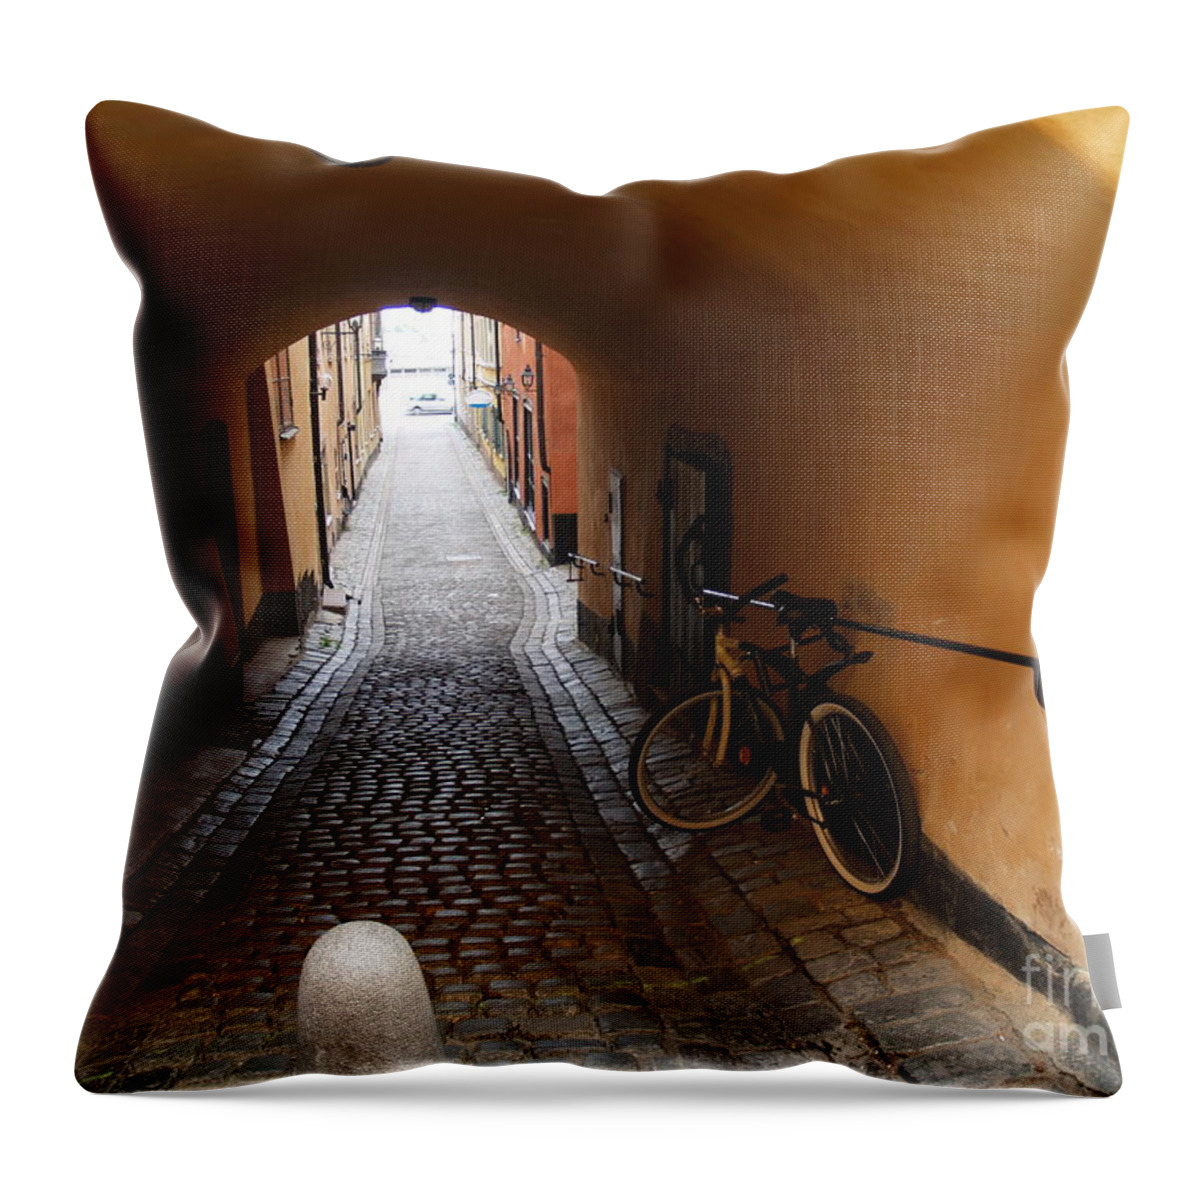 Bicycle Throw Pillow featuring the photograph Bicycle in Tunnel by Robin Pedrero